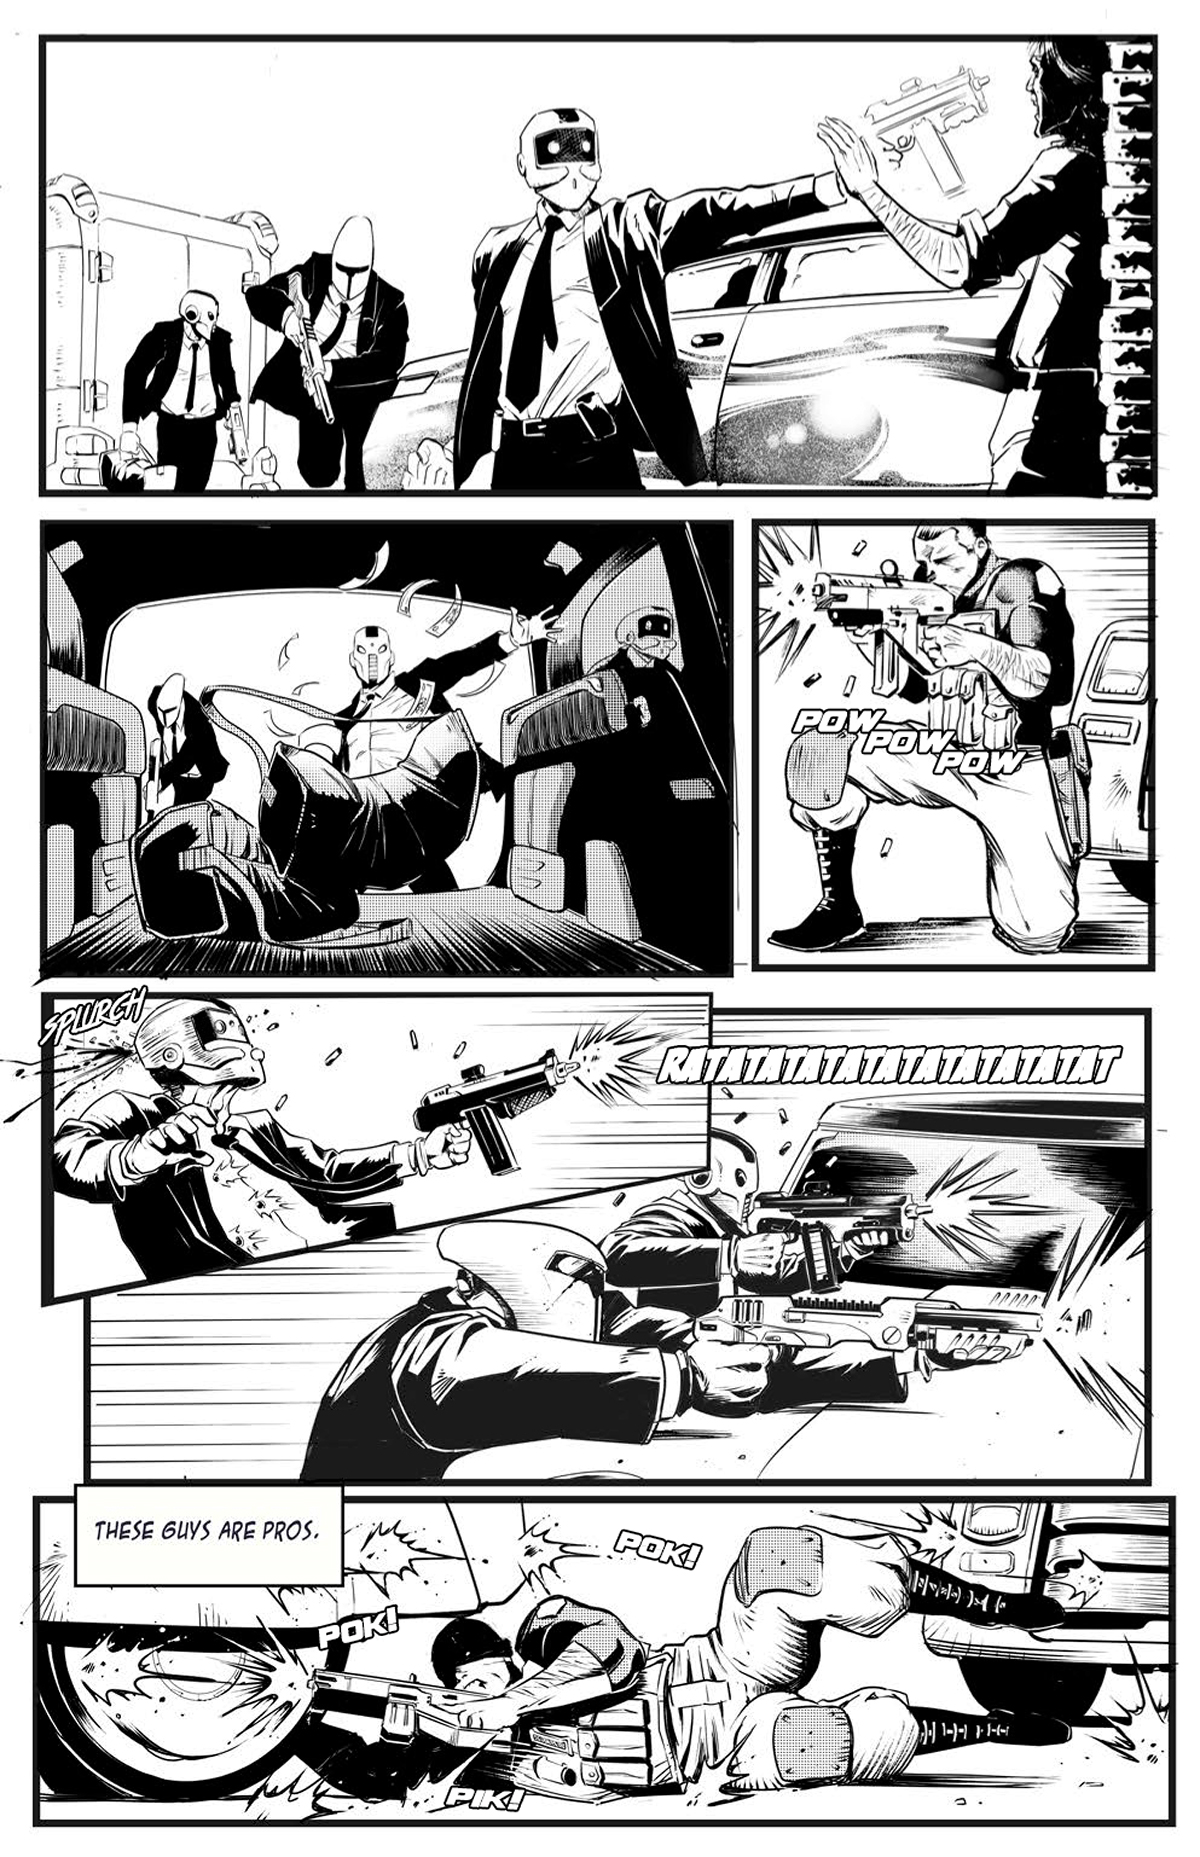 Page 4 of Bank Robbery